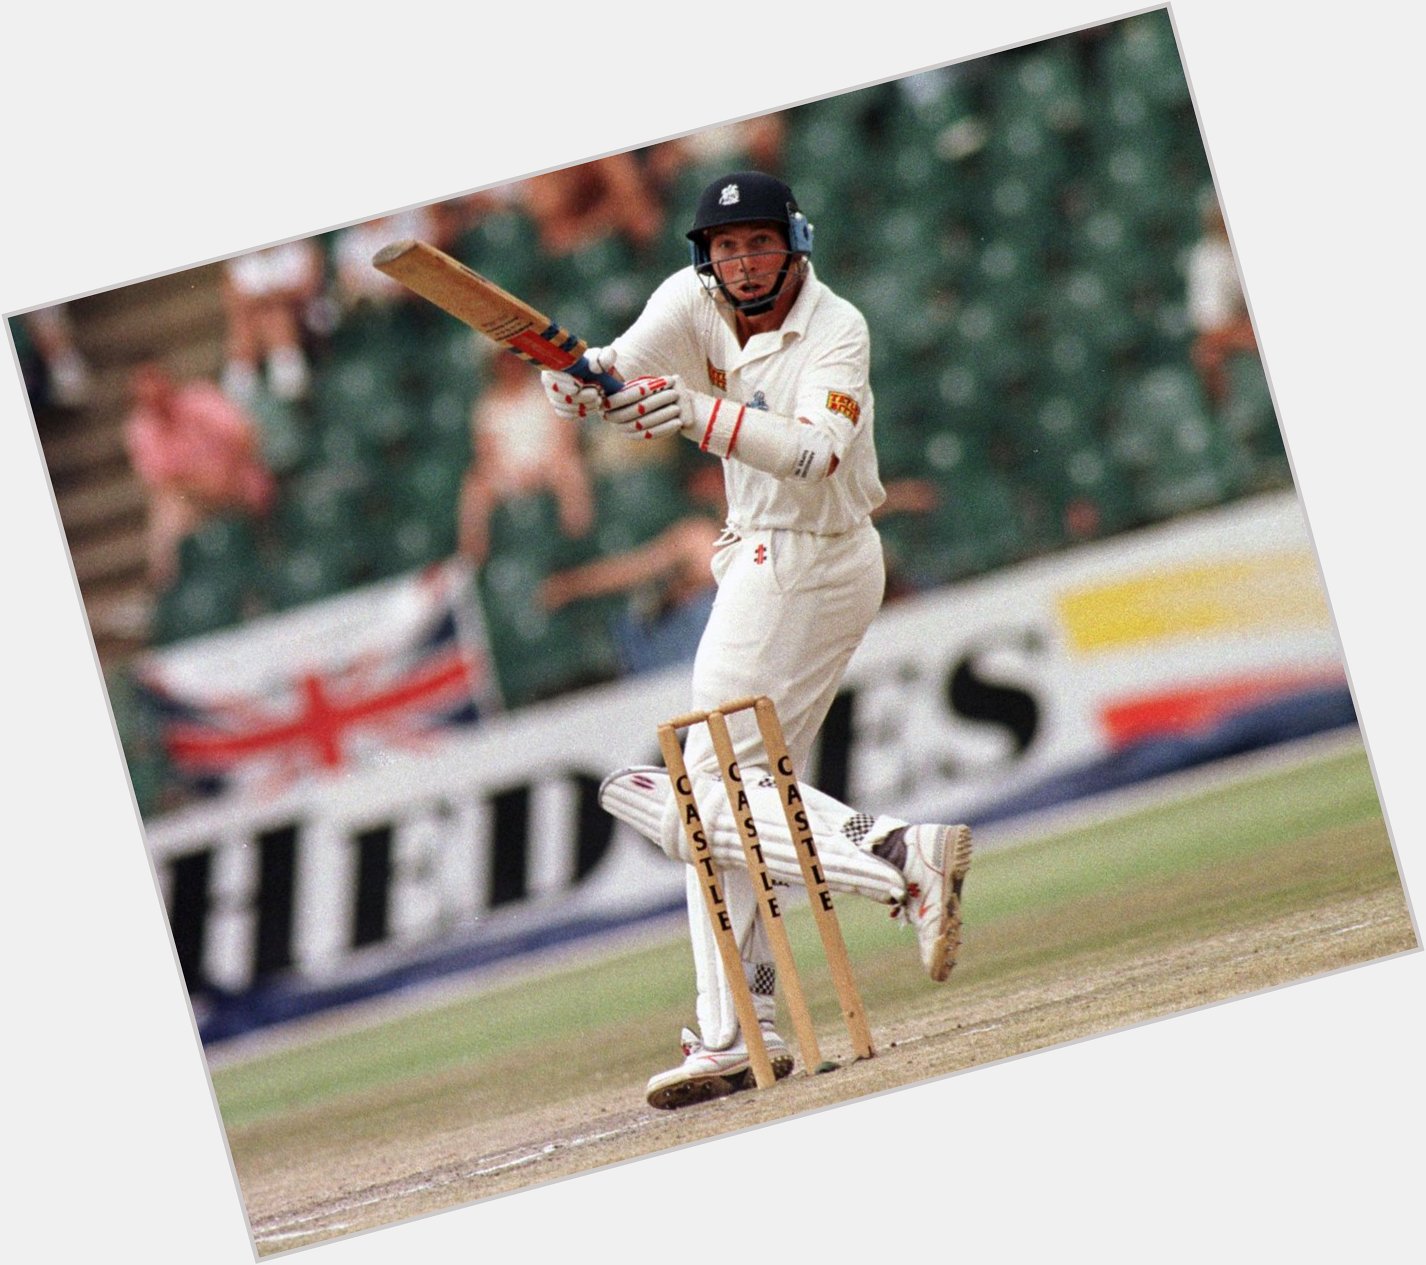  Happy birthday to Mike Atherton! What was your favourite Athers innings? 

 